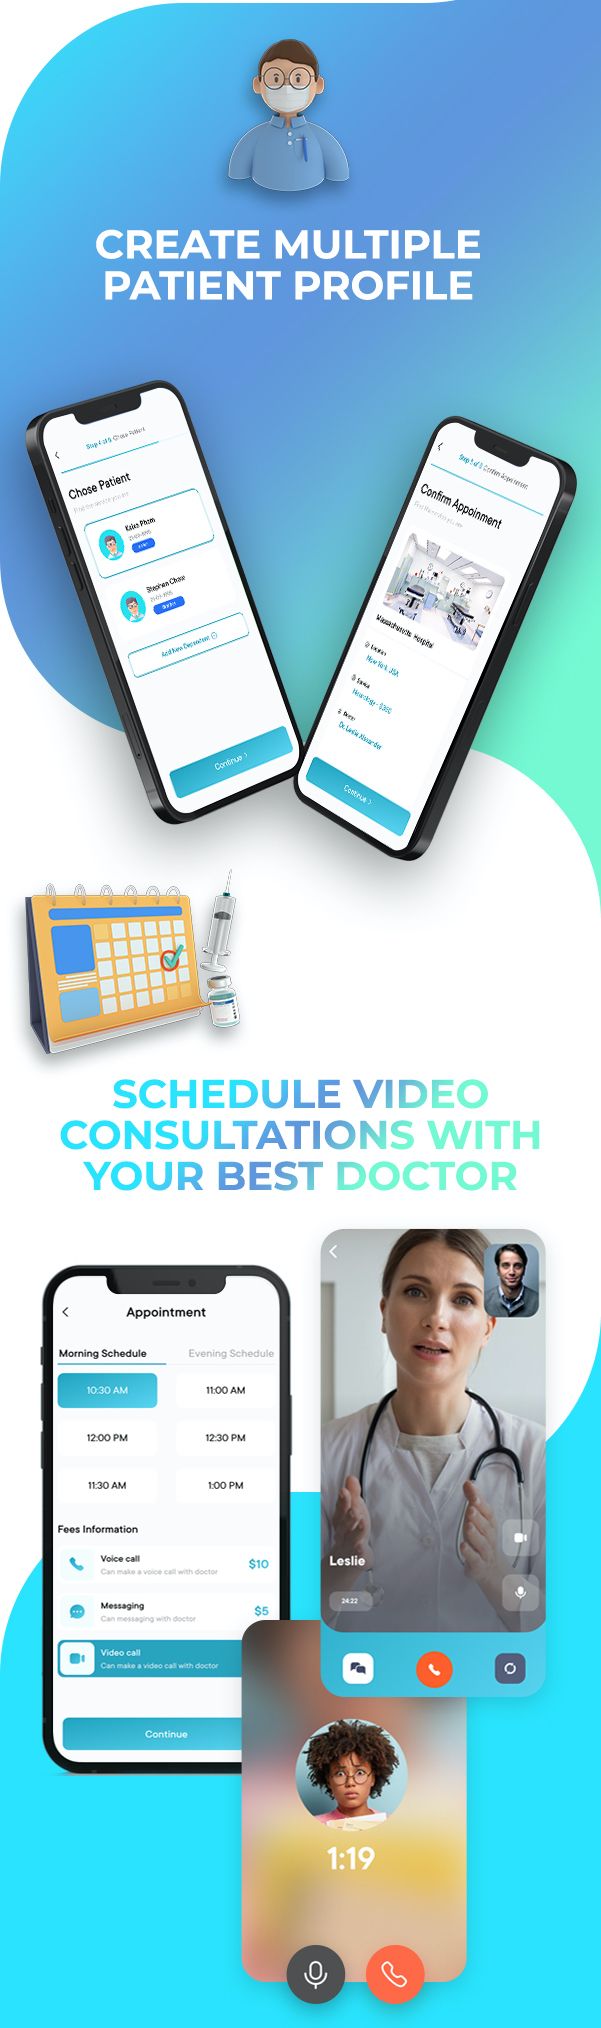 Medi - Doctor Appointment Booking Flutter App UI Template - 7